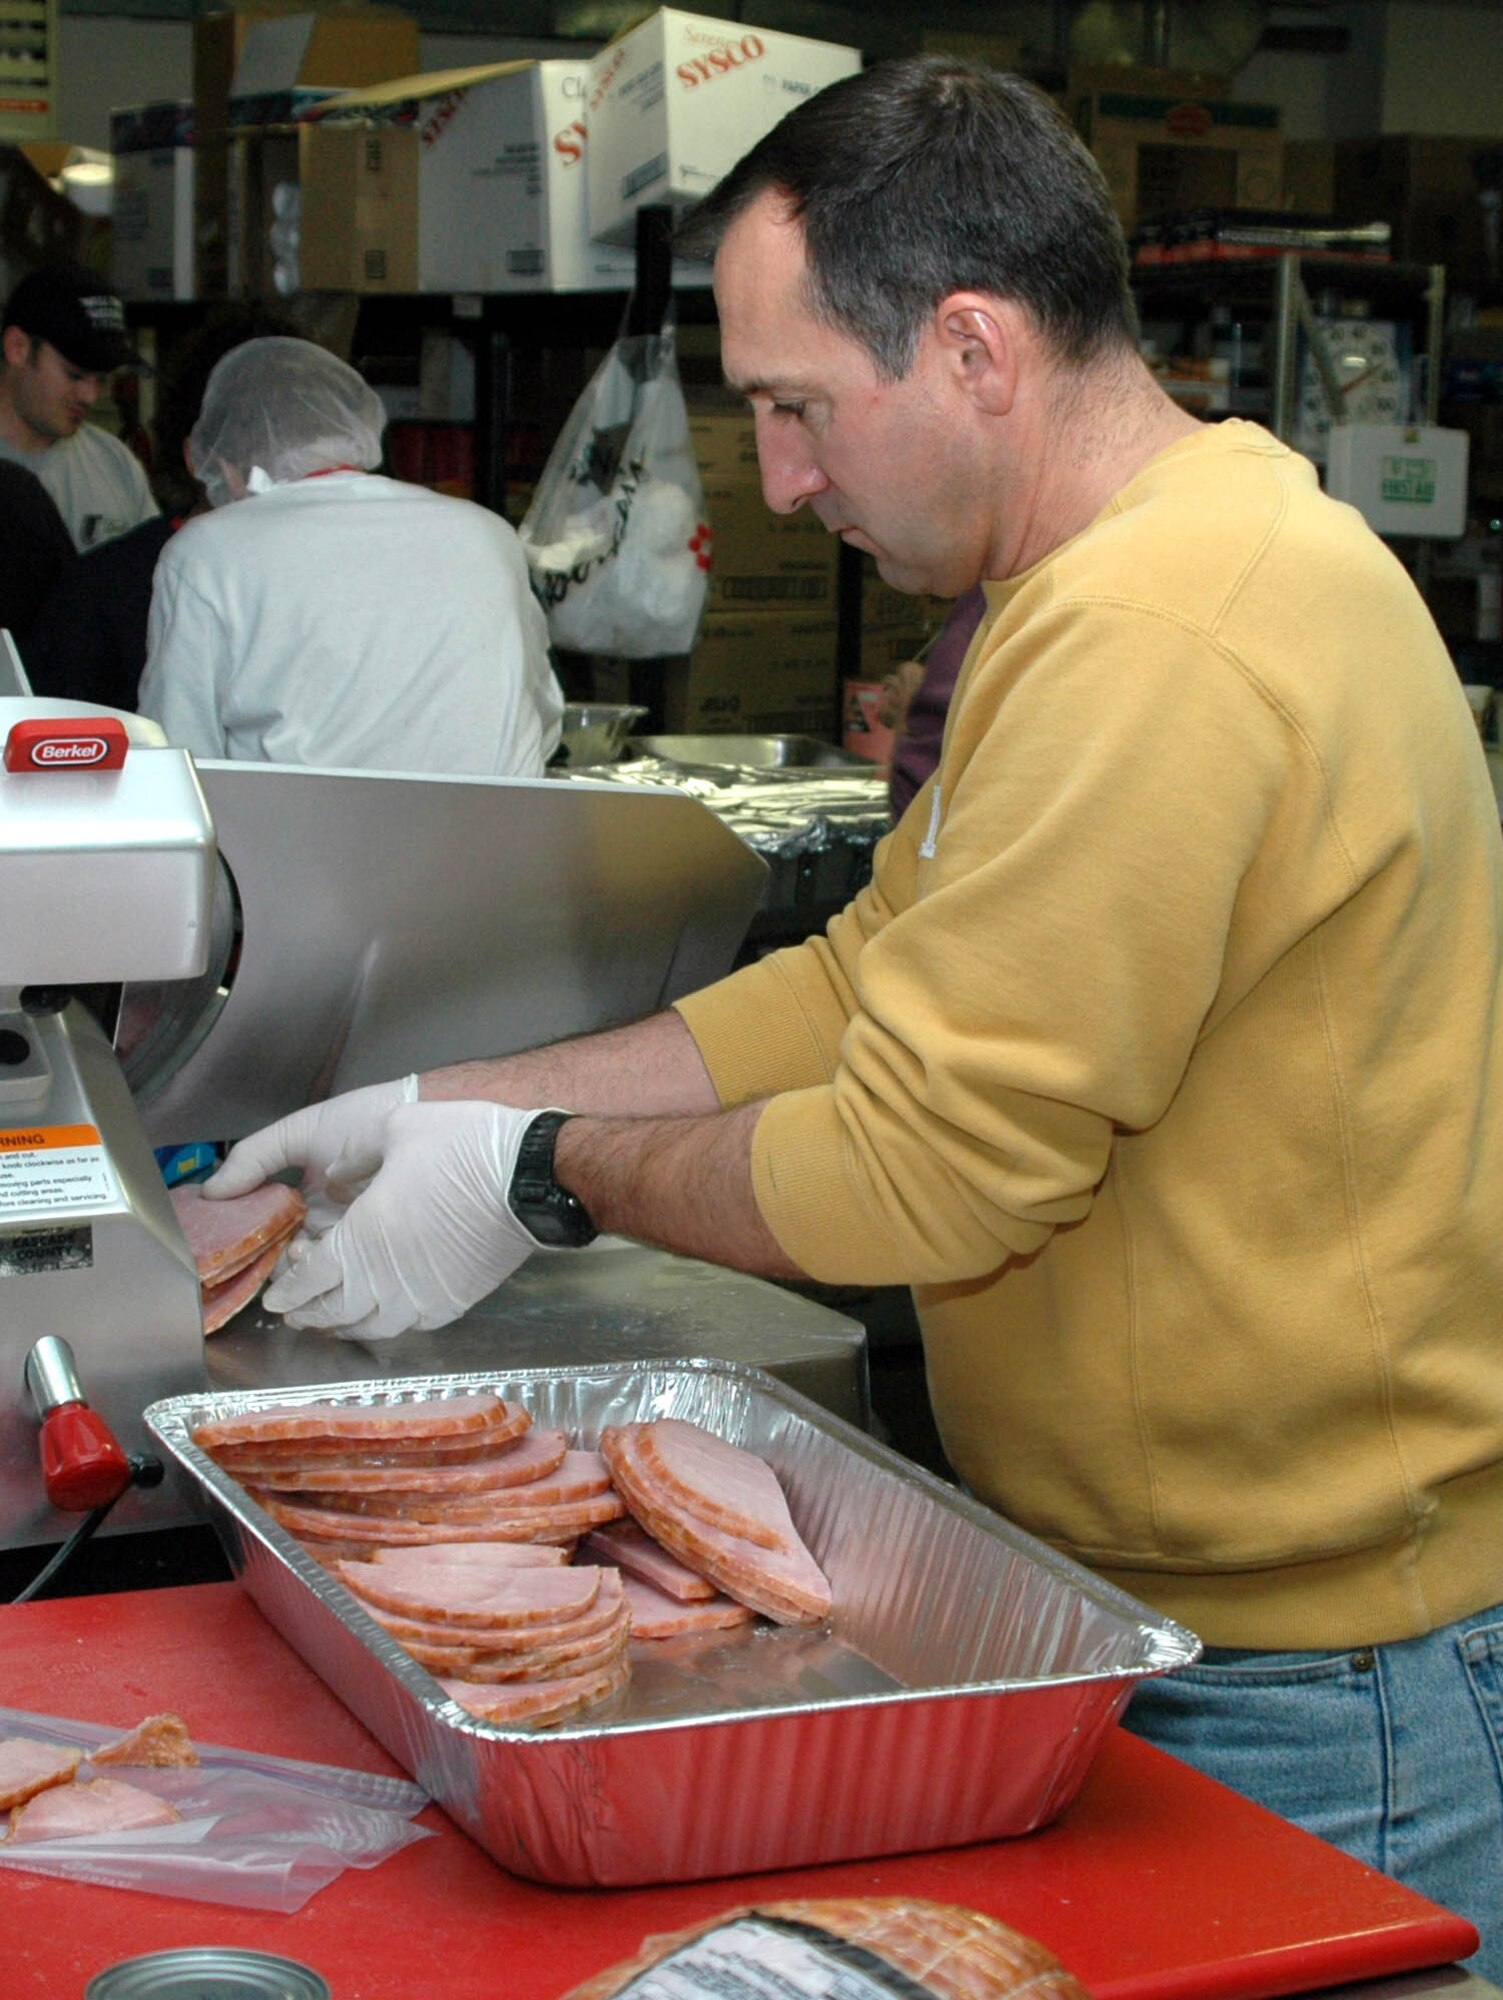 Brian Jolly, 341st MSS deputy director, slices ham for Meals-on-Wheels.